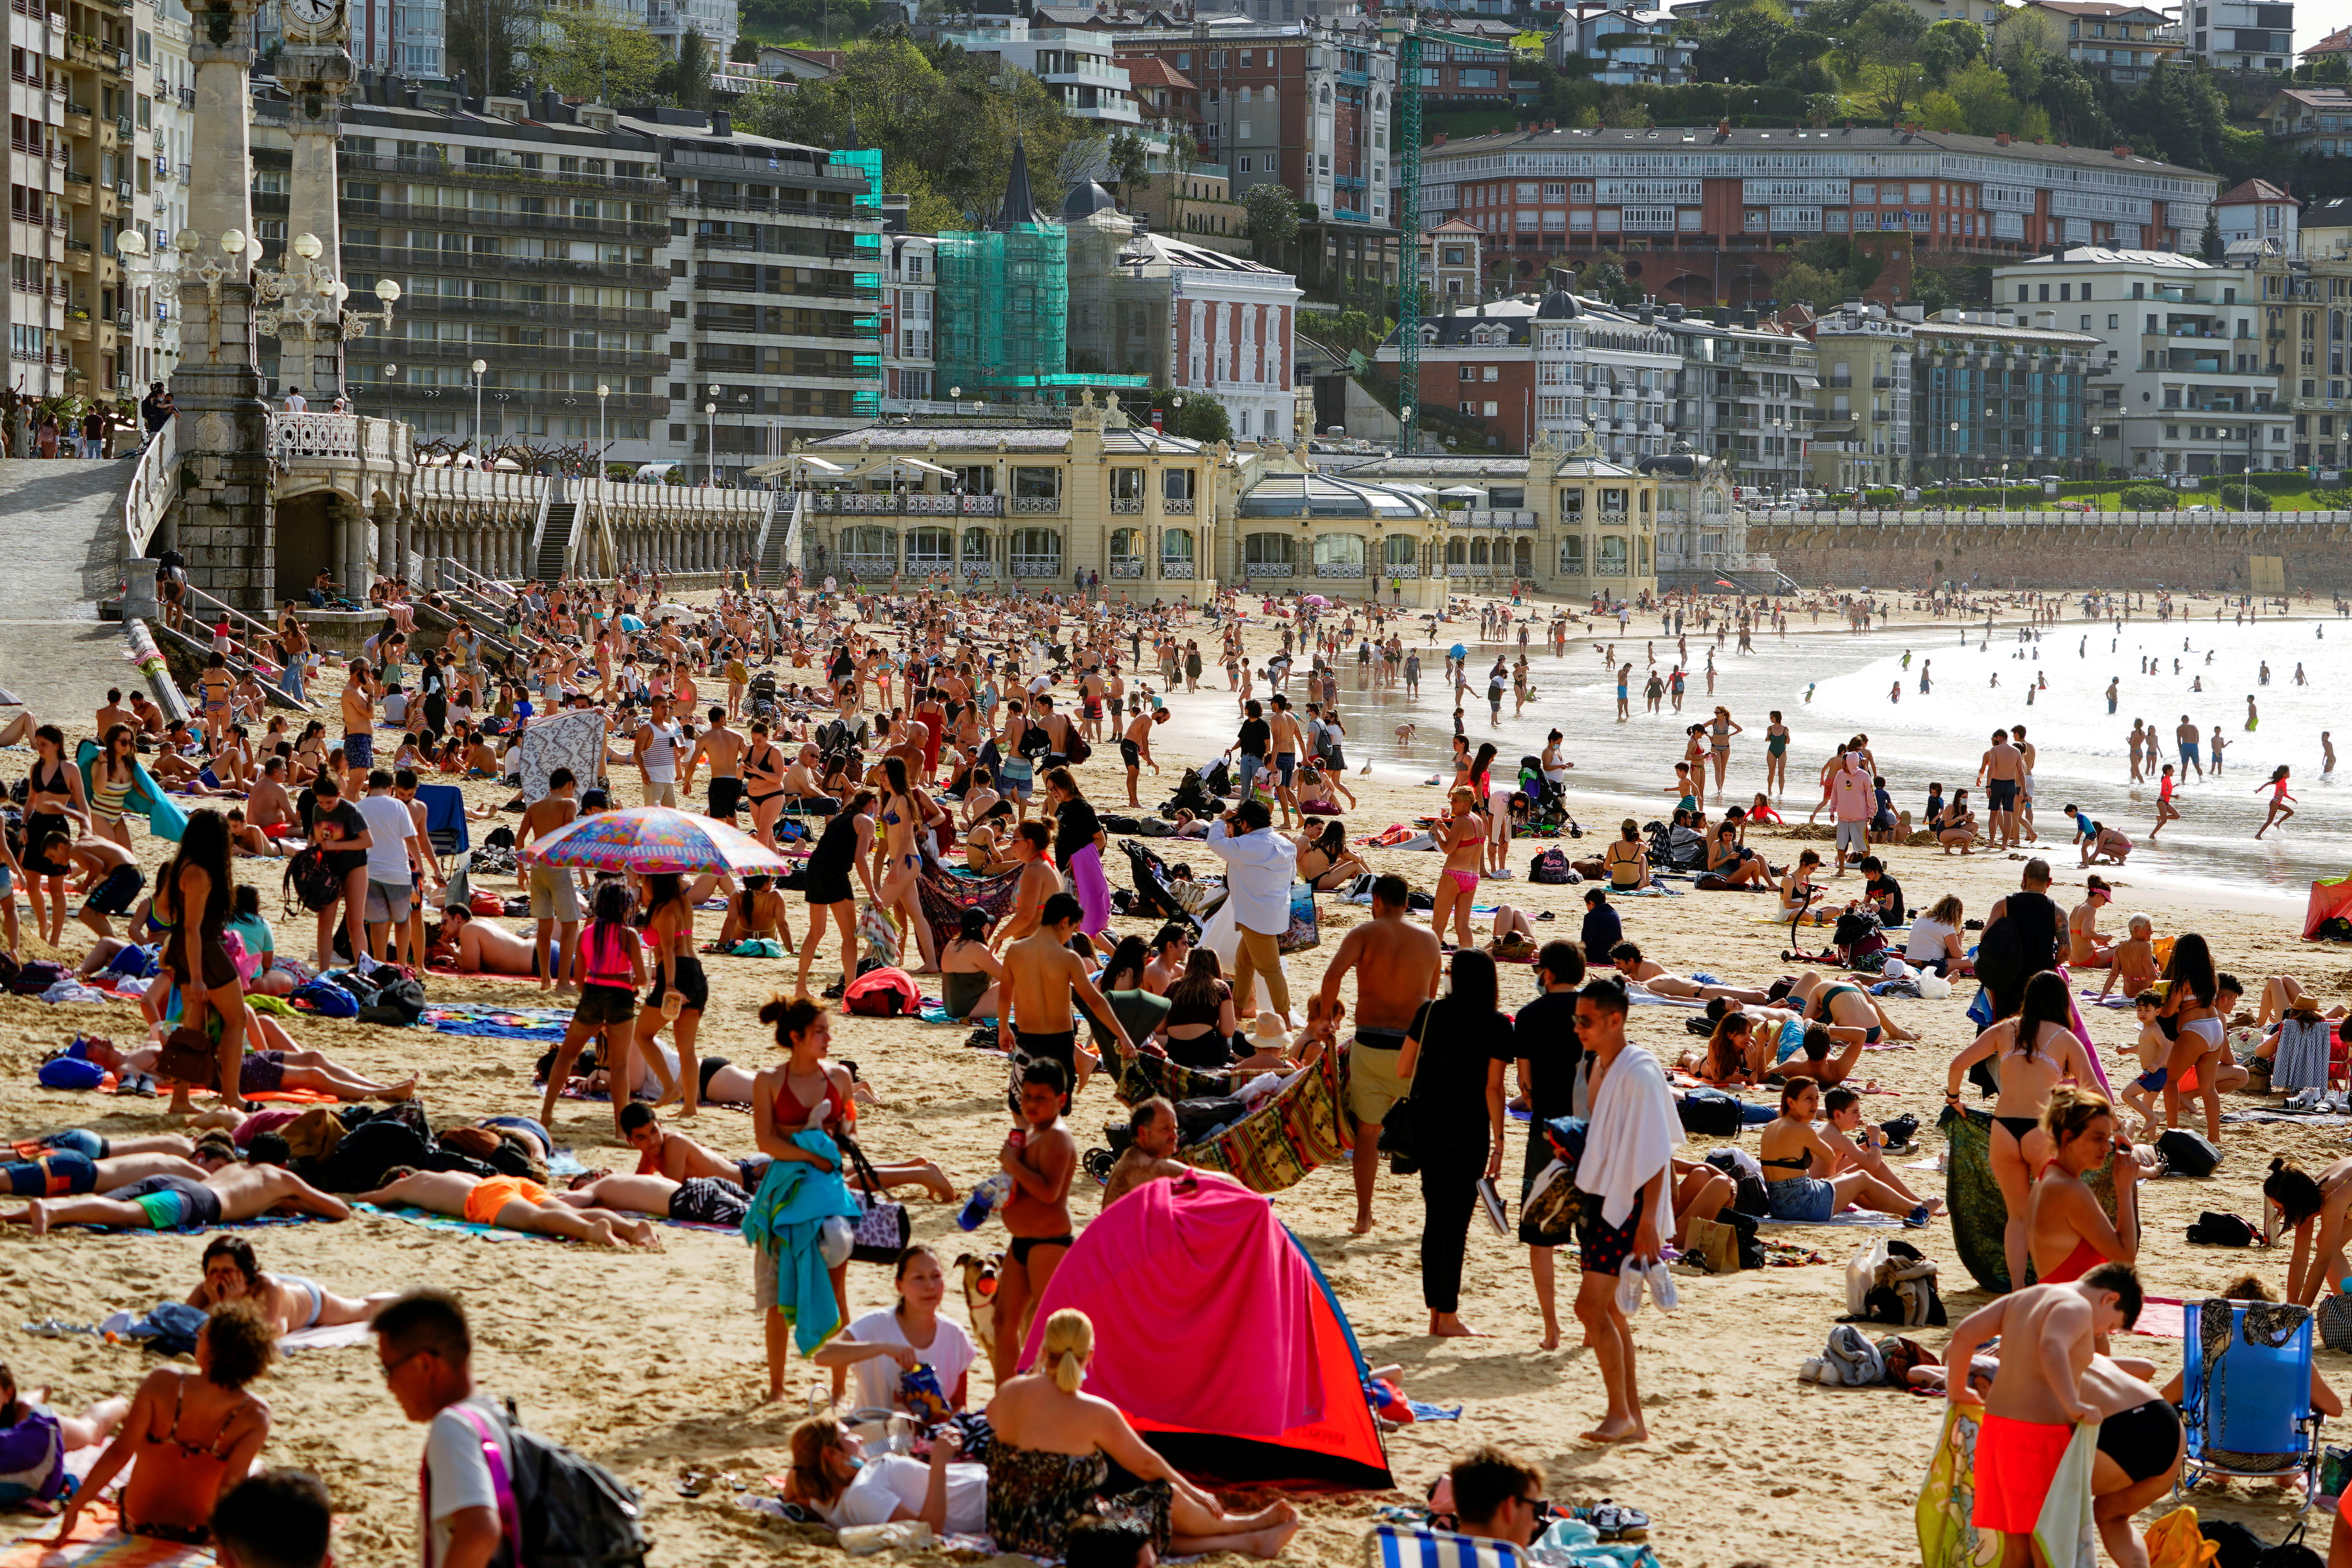 People enjoy the sun at La Concha beach after Spain introduced stricter mask laws during the coronavirus disease (COVID-19) outbreak, in San Sebastian